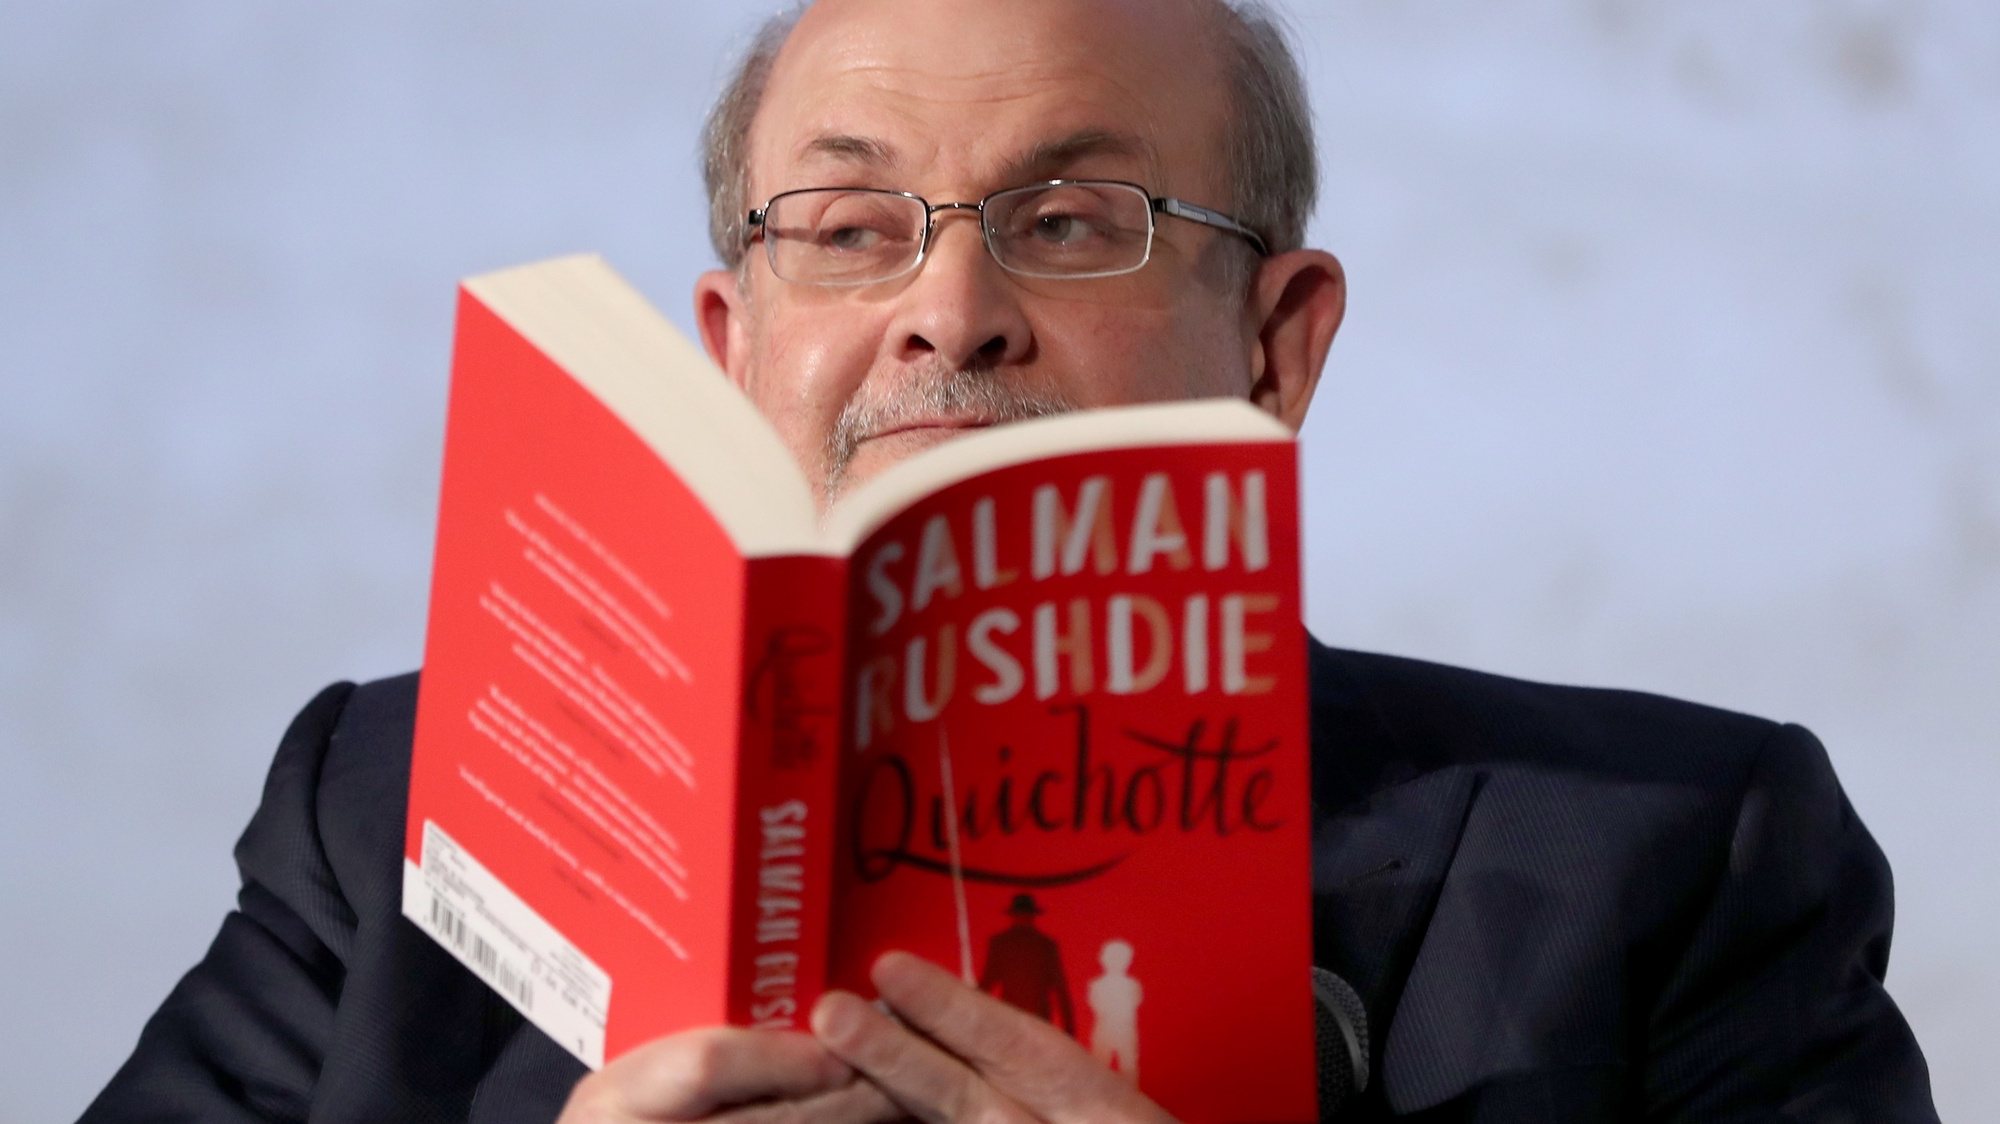 epa07989137 British-Indian author Salman Rushdie attends a book reading event for his new novel, titled &#039;Quichotte&#039;, in Berlin, Germany, 11 November 2019. The book was shortlisted for the 2019 Booker Prize.  EPA/HAYOUNG JEON